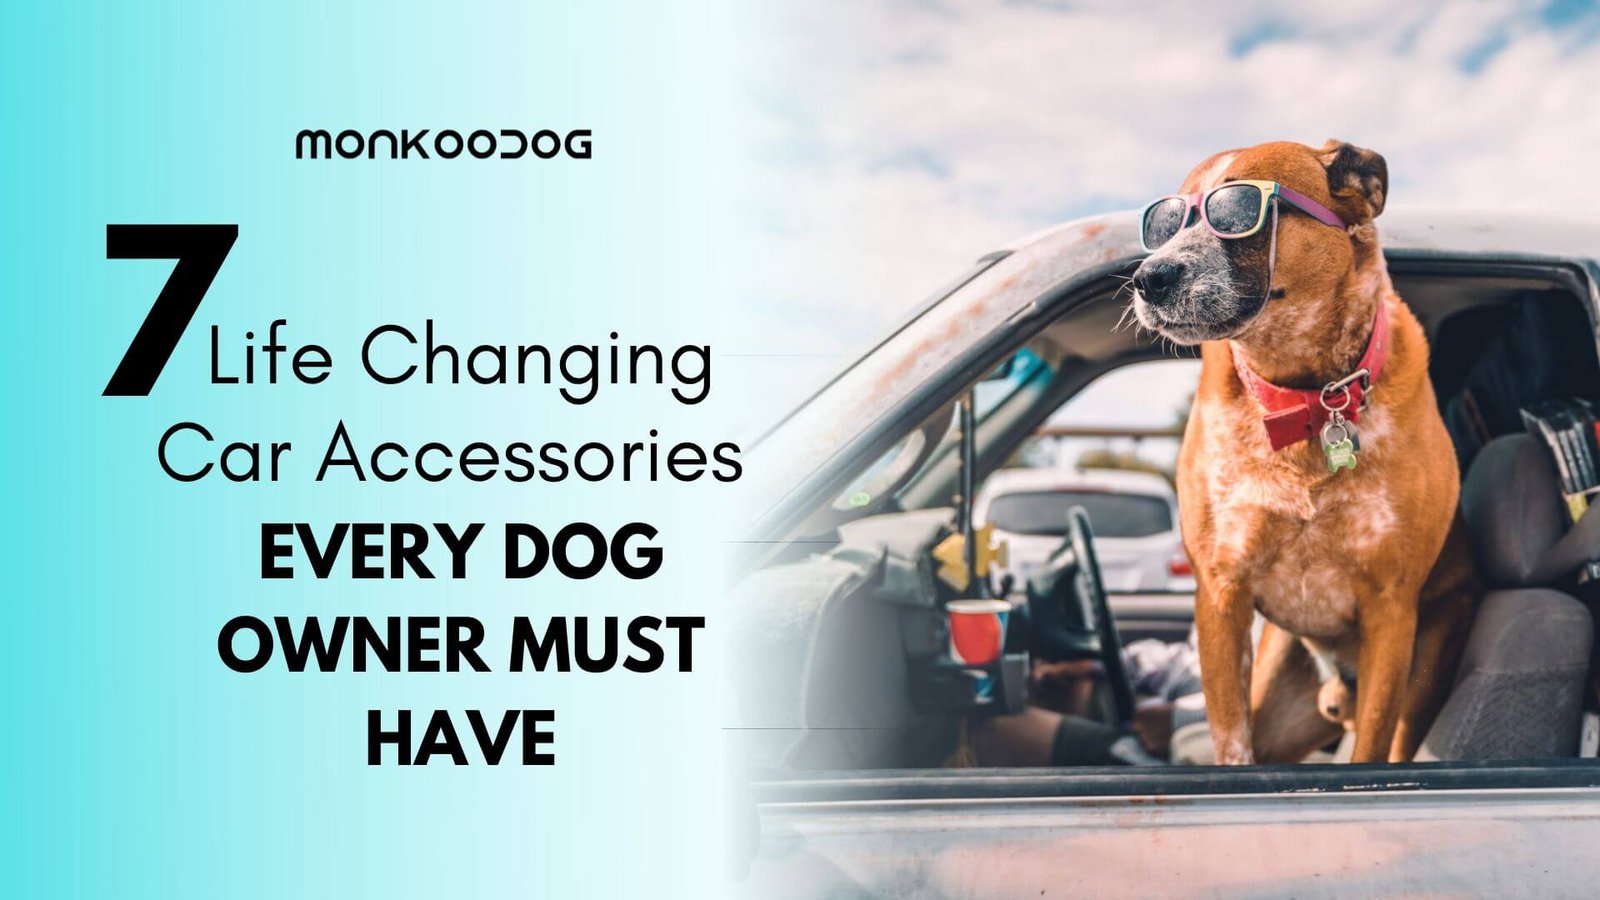 https://www.monkoodog.com/wp-content/uploads/2020/07/Top-7-Car-accessories-for-your-car-to-make-it-dog-friendly-1.jpg